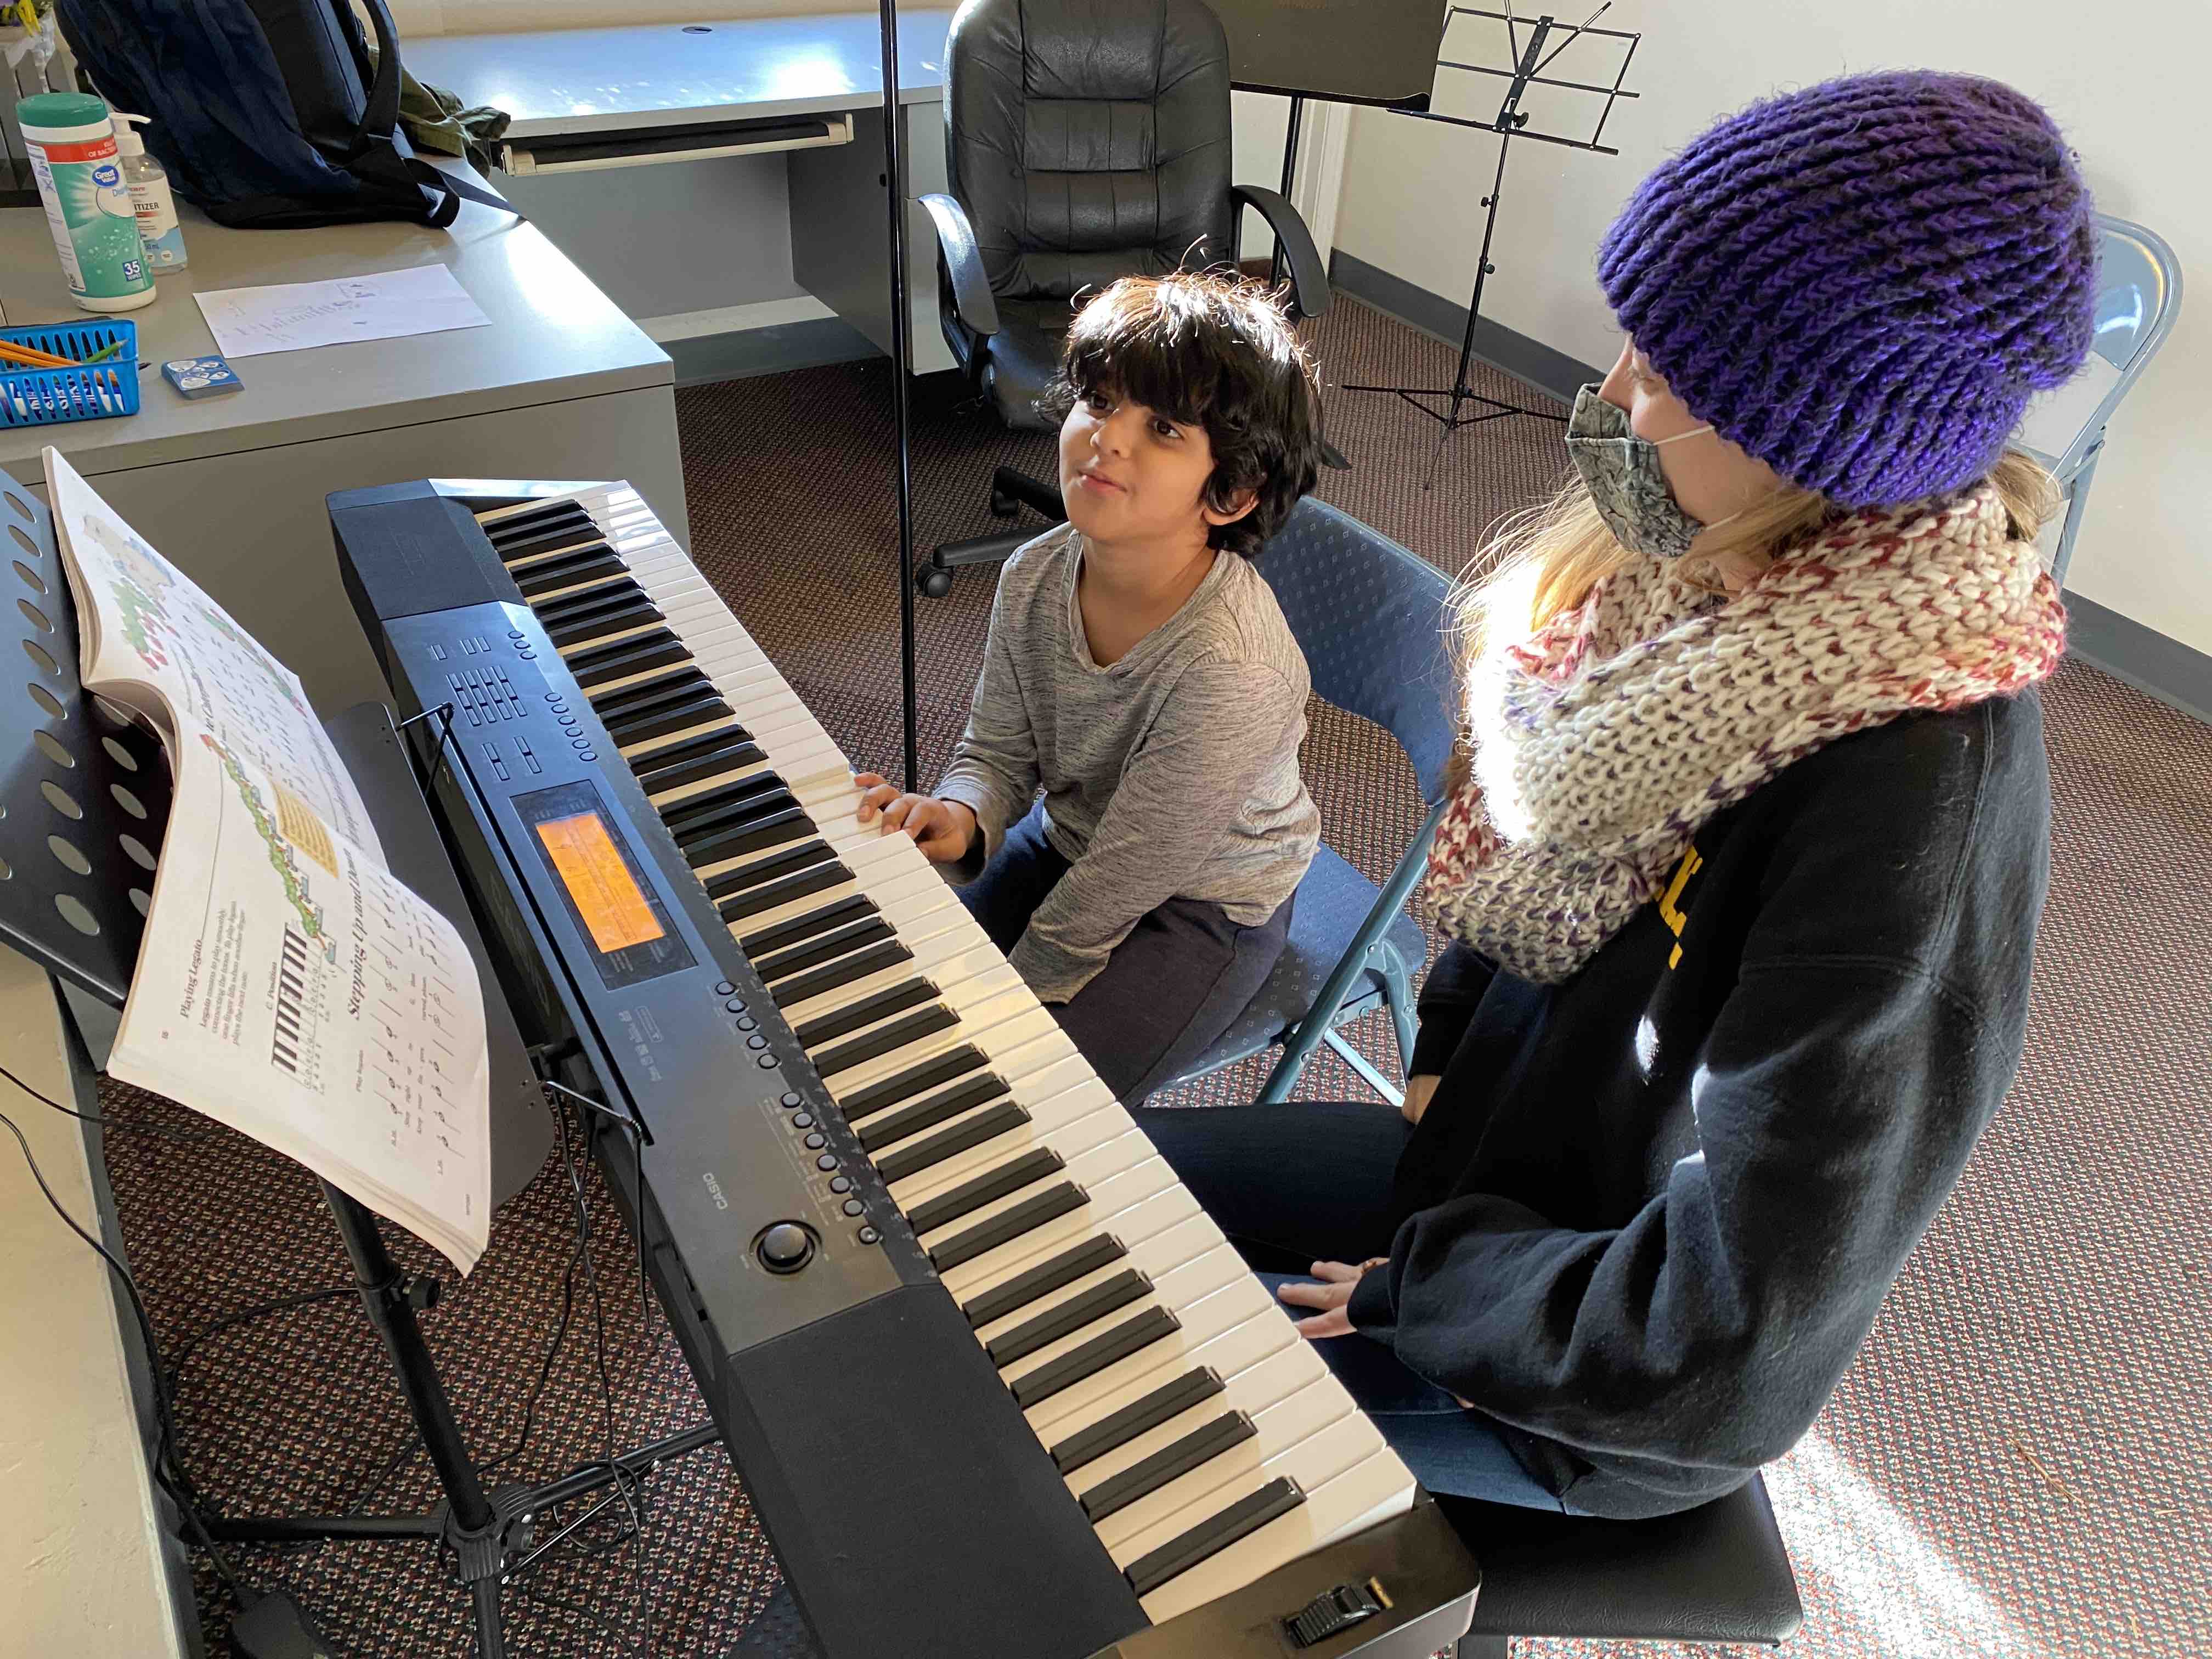 Teacher and young student learning piano